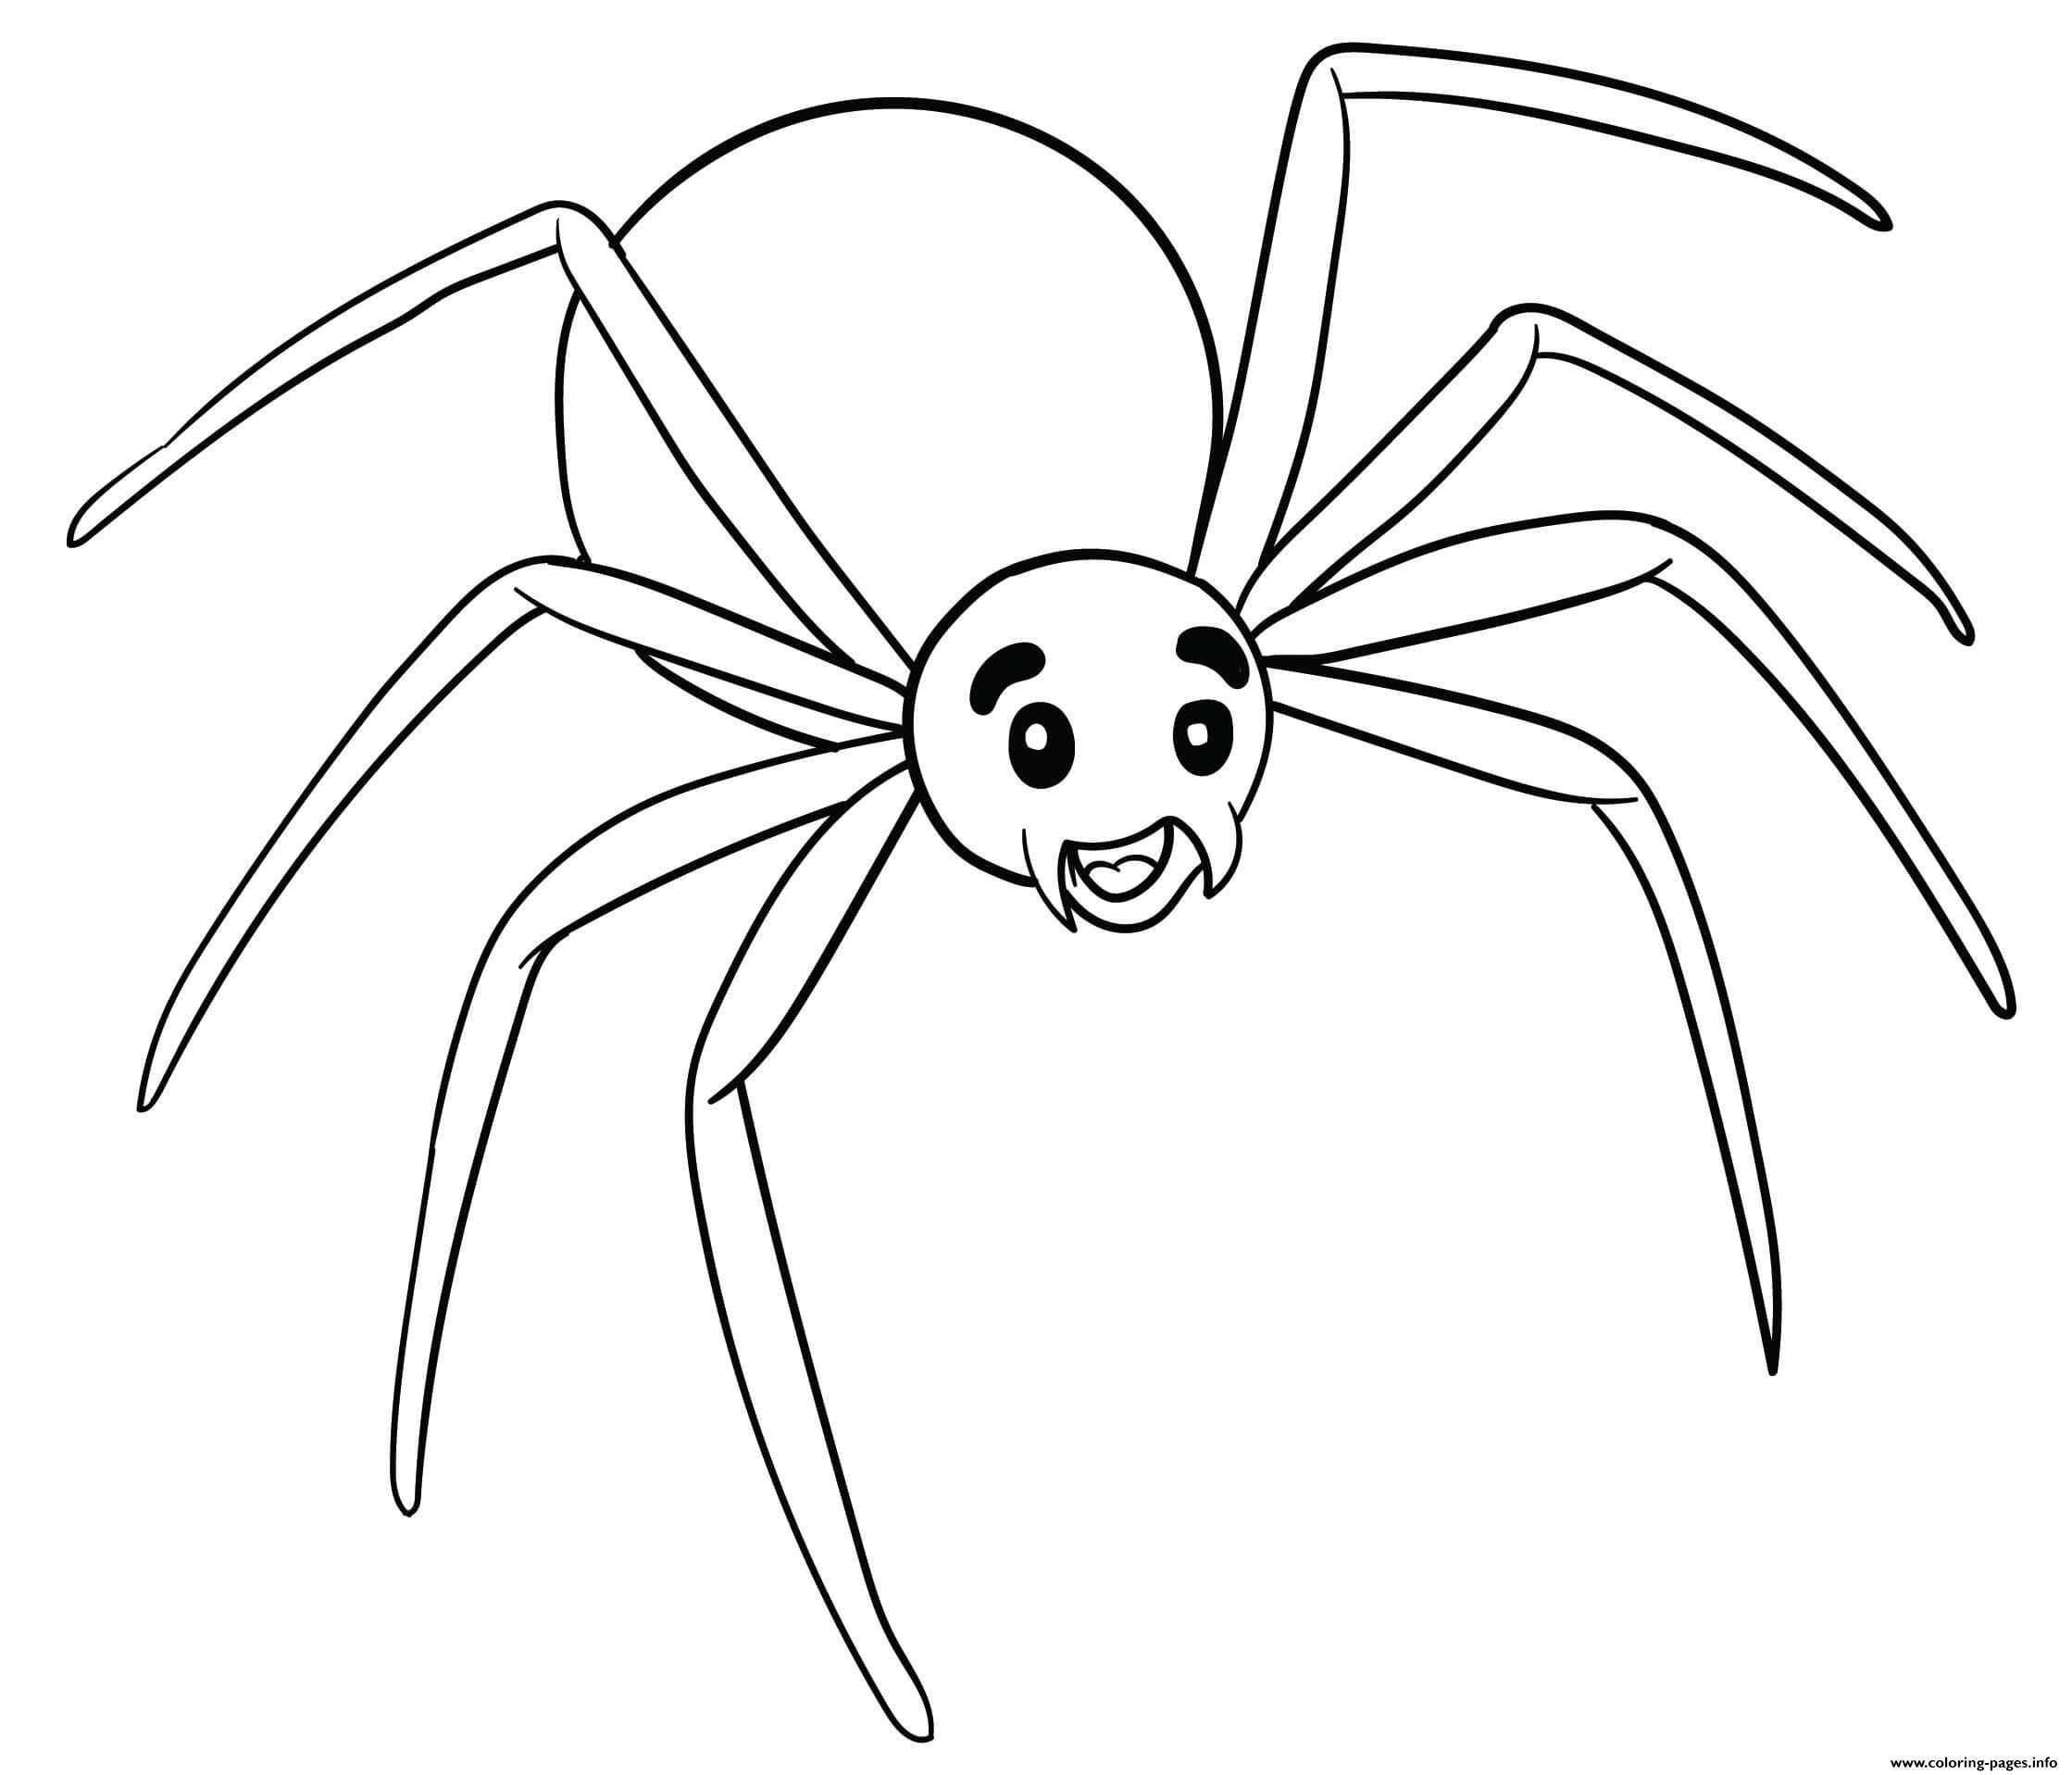 Simple Spider coloring